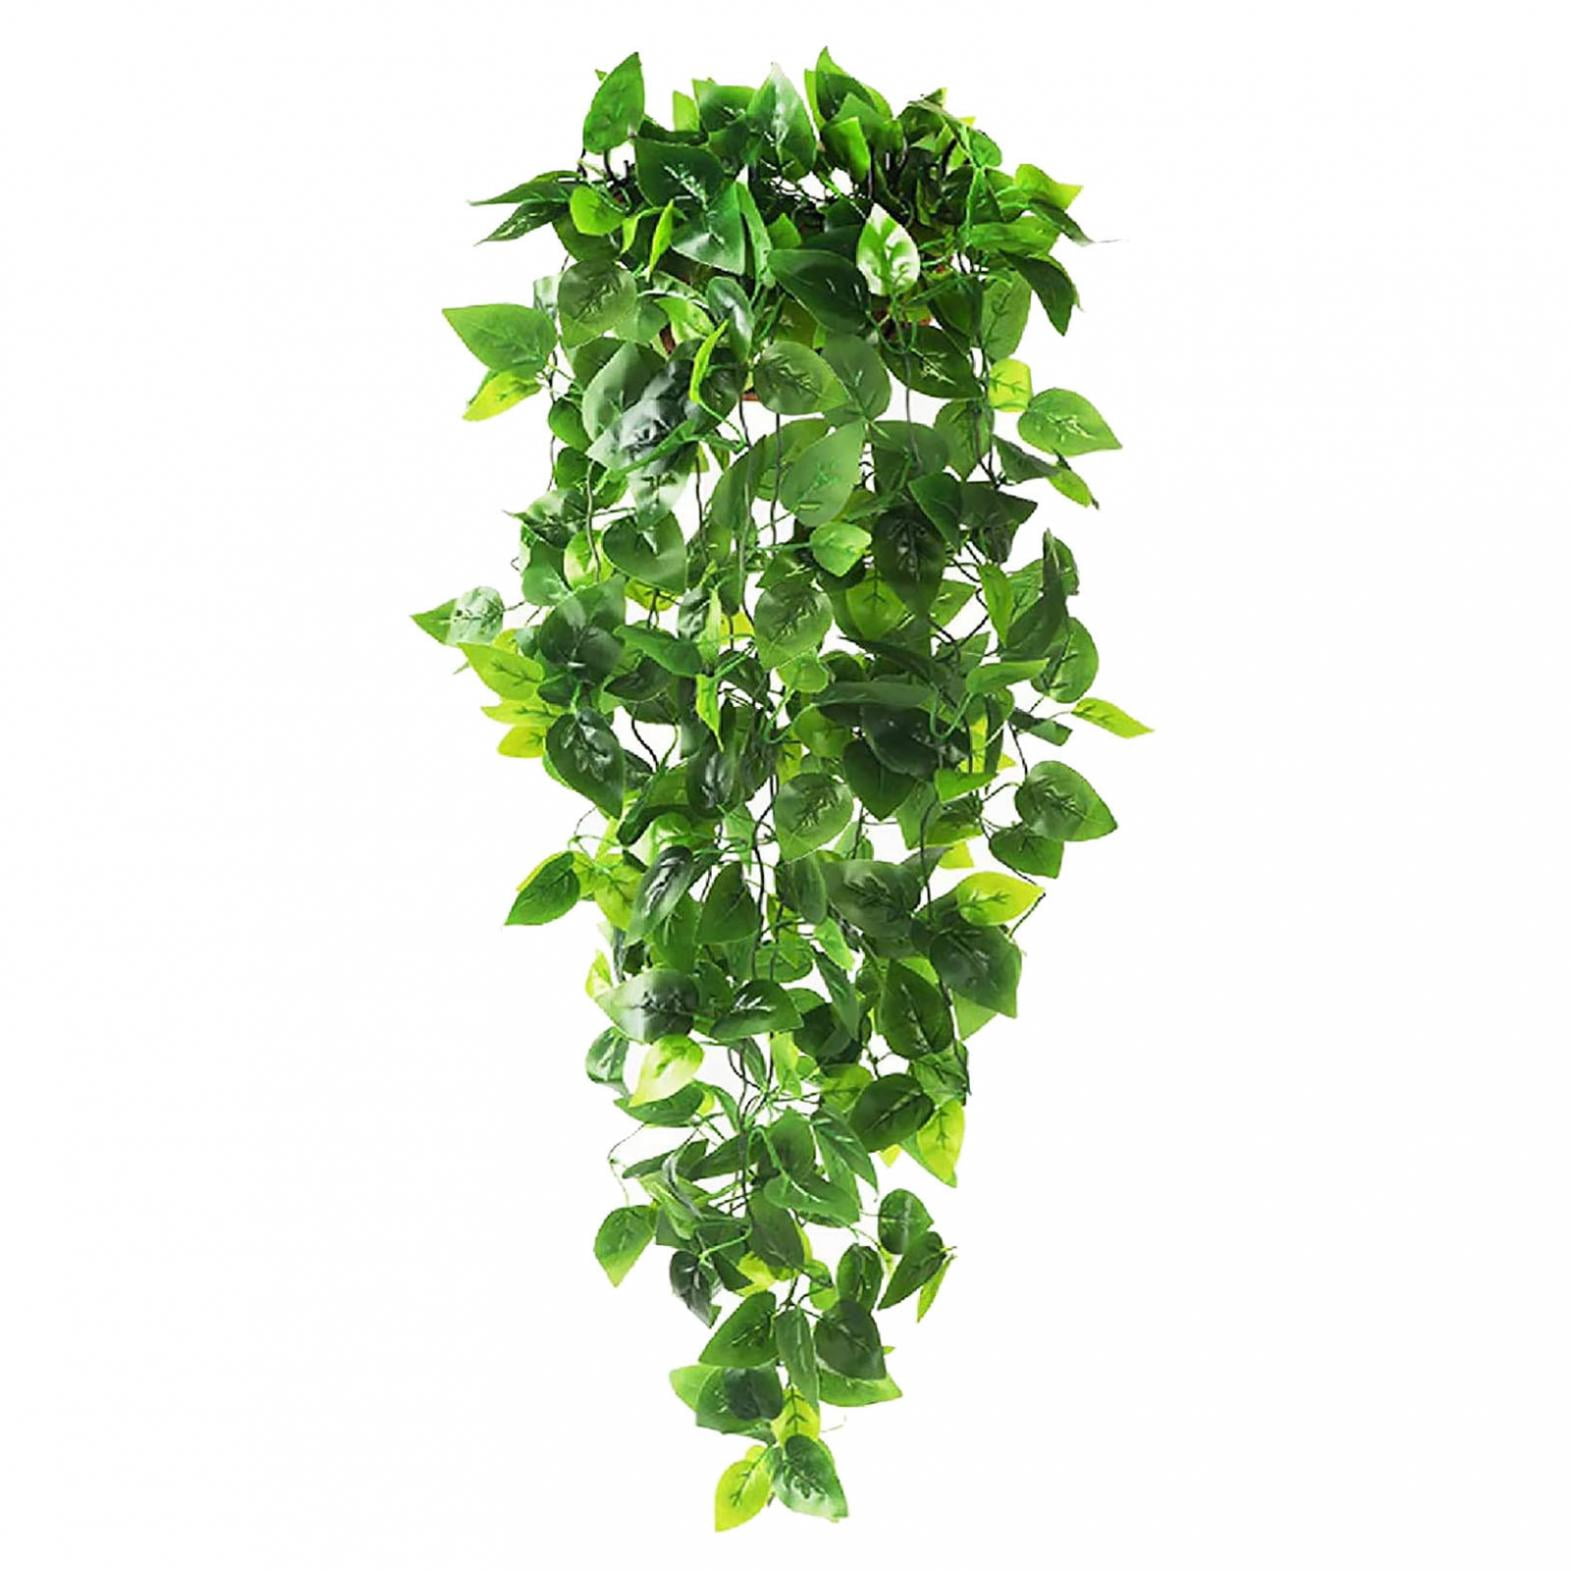  Fern Decorative Vines,Hanging Simulation Series Tree Vine  Leaves,Plant Wall Hanging Leaves : Home & Kitchen